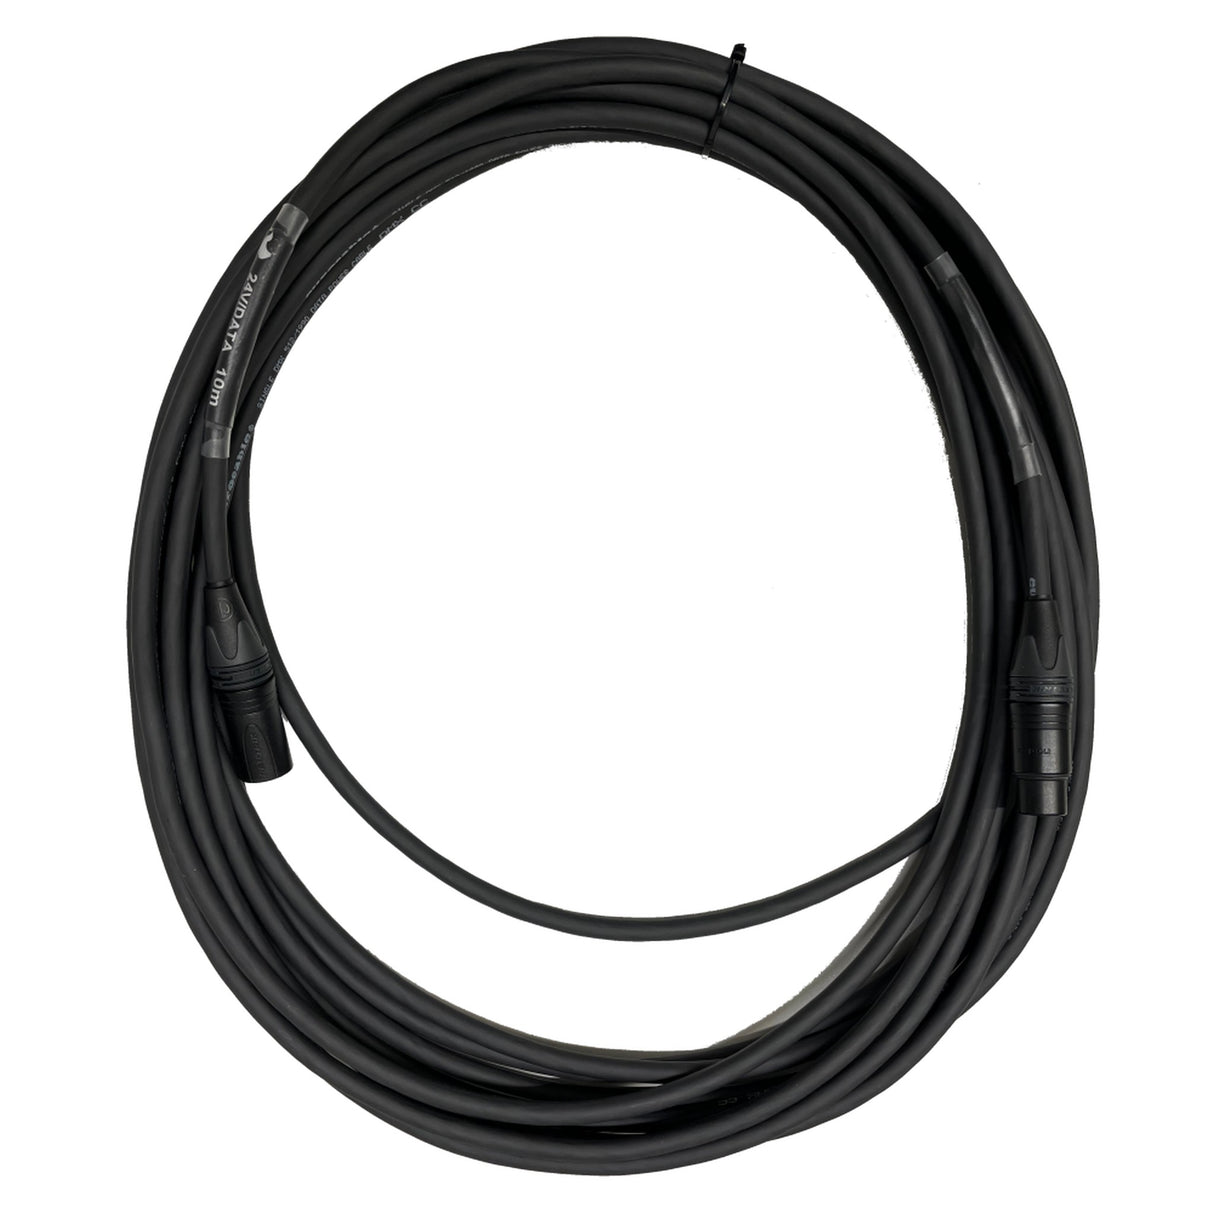 Waterbird 4-Pin XLR Power Data Cable for MS PRO/MS Swift/MS XL, 10-Meters